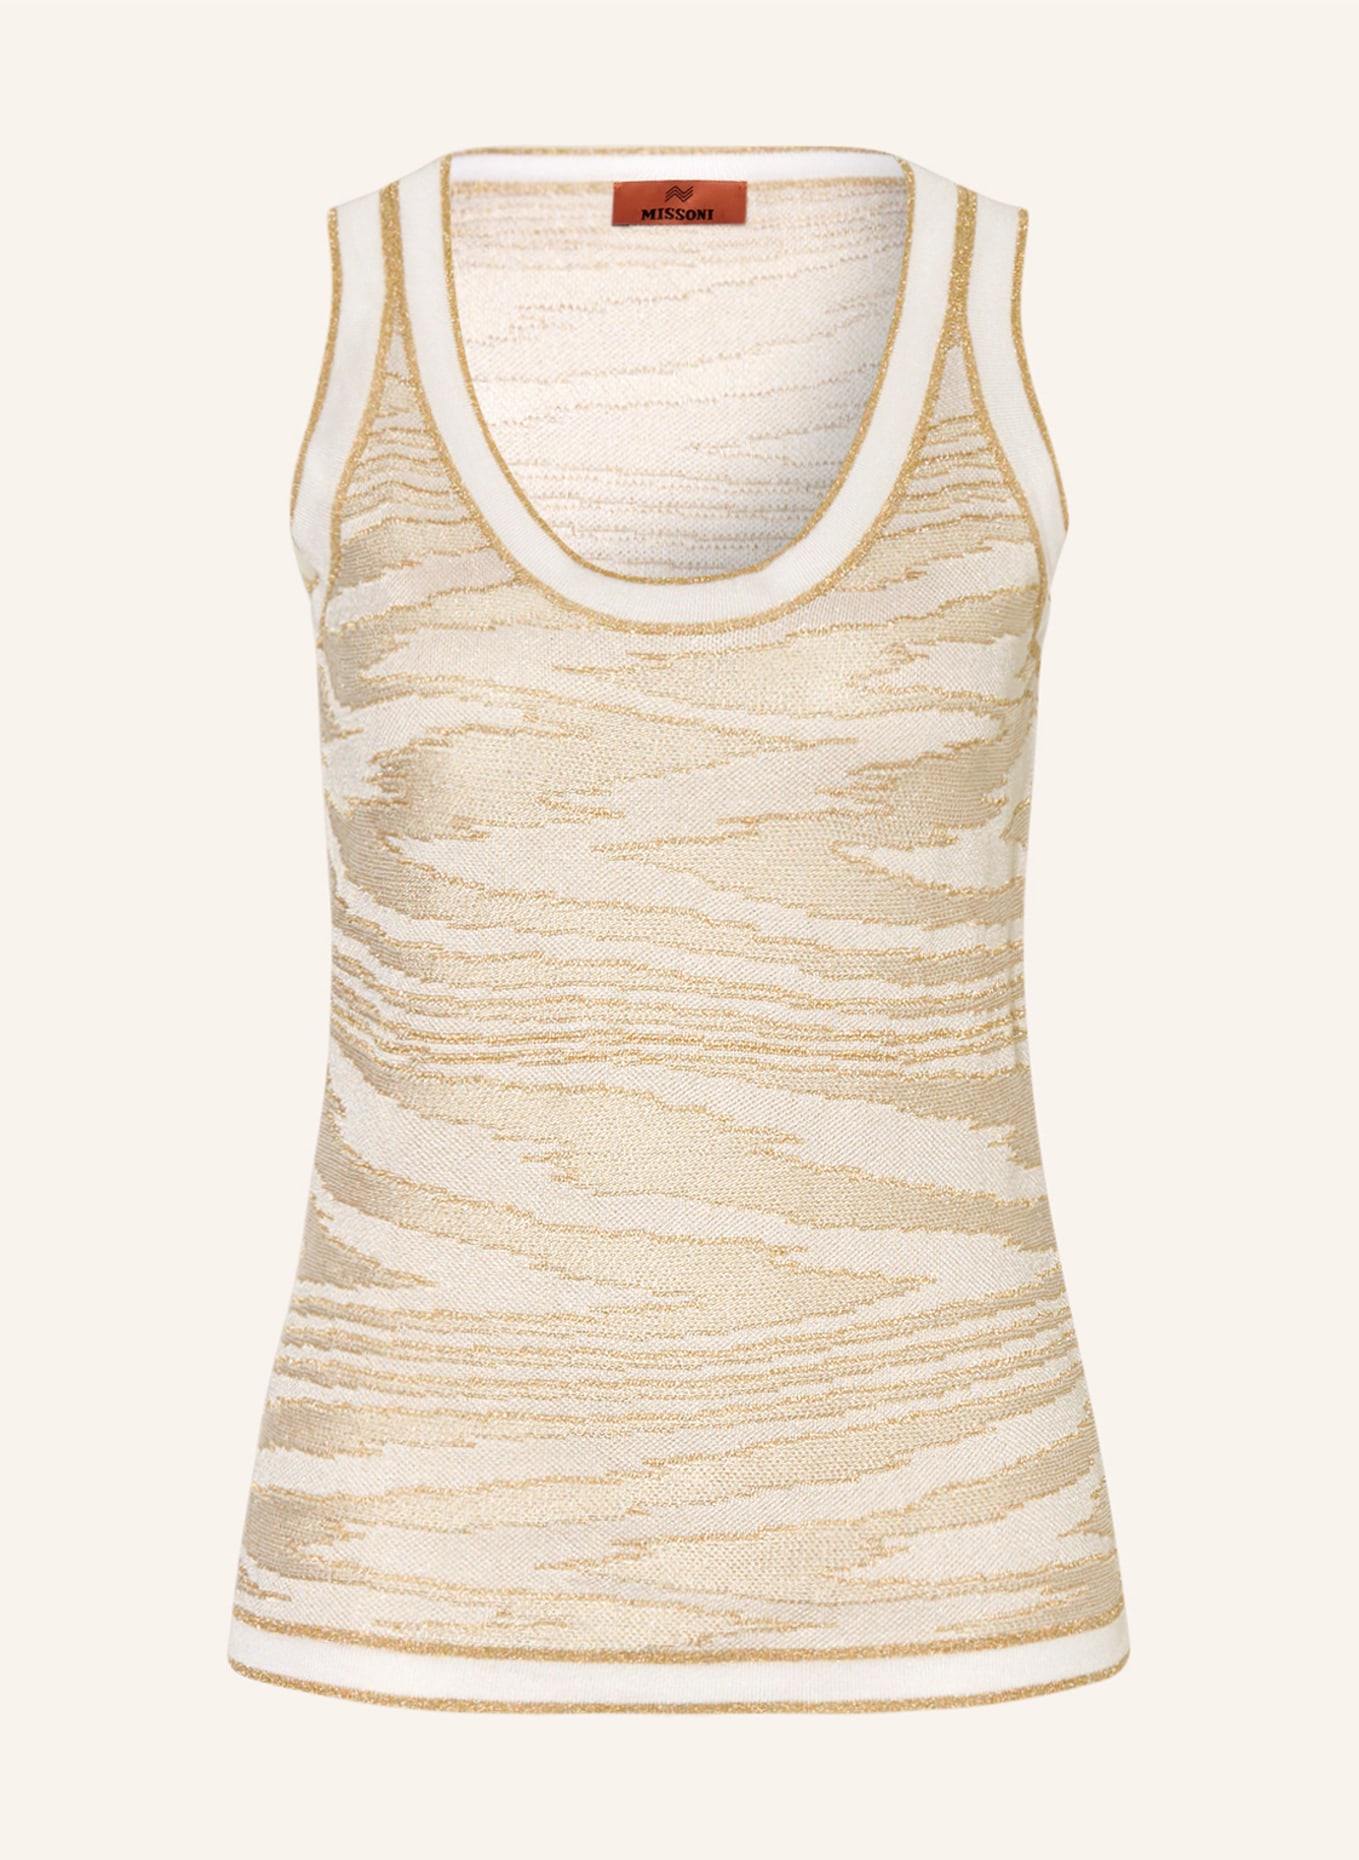 MISSONI Knit top with glitter thread, Color: WHITE/ GOLD (Image 1)